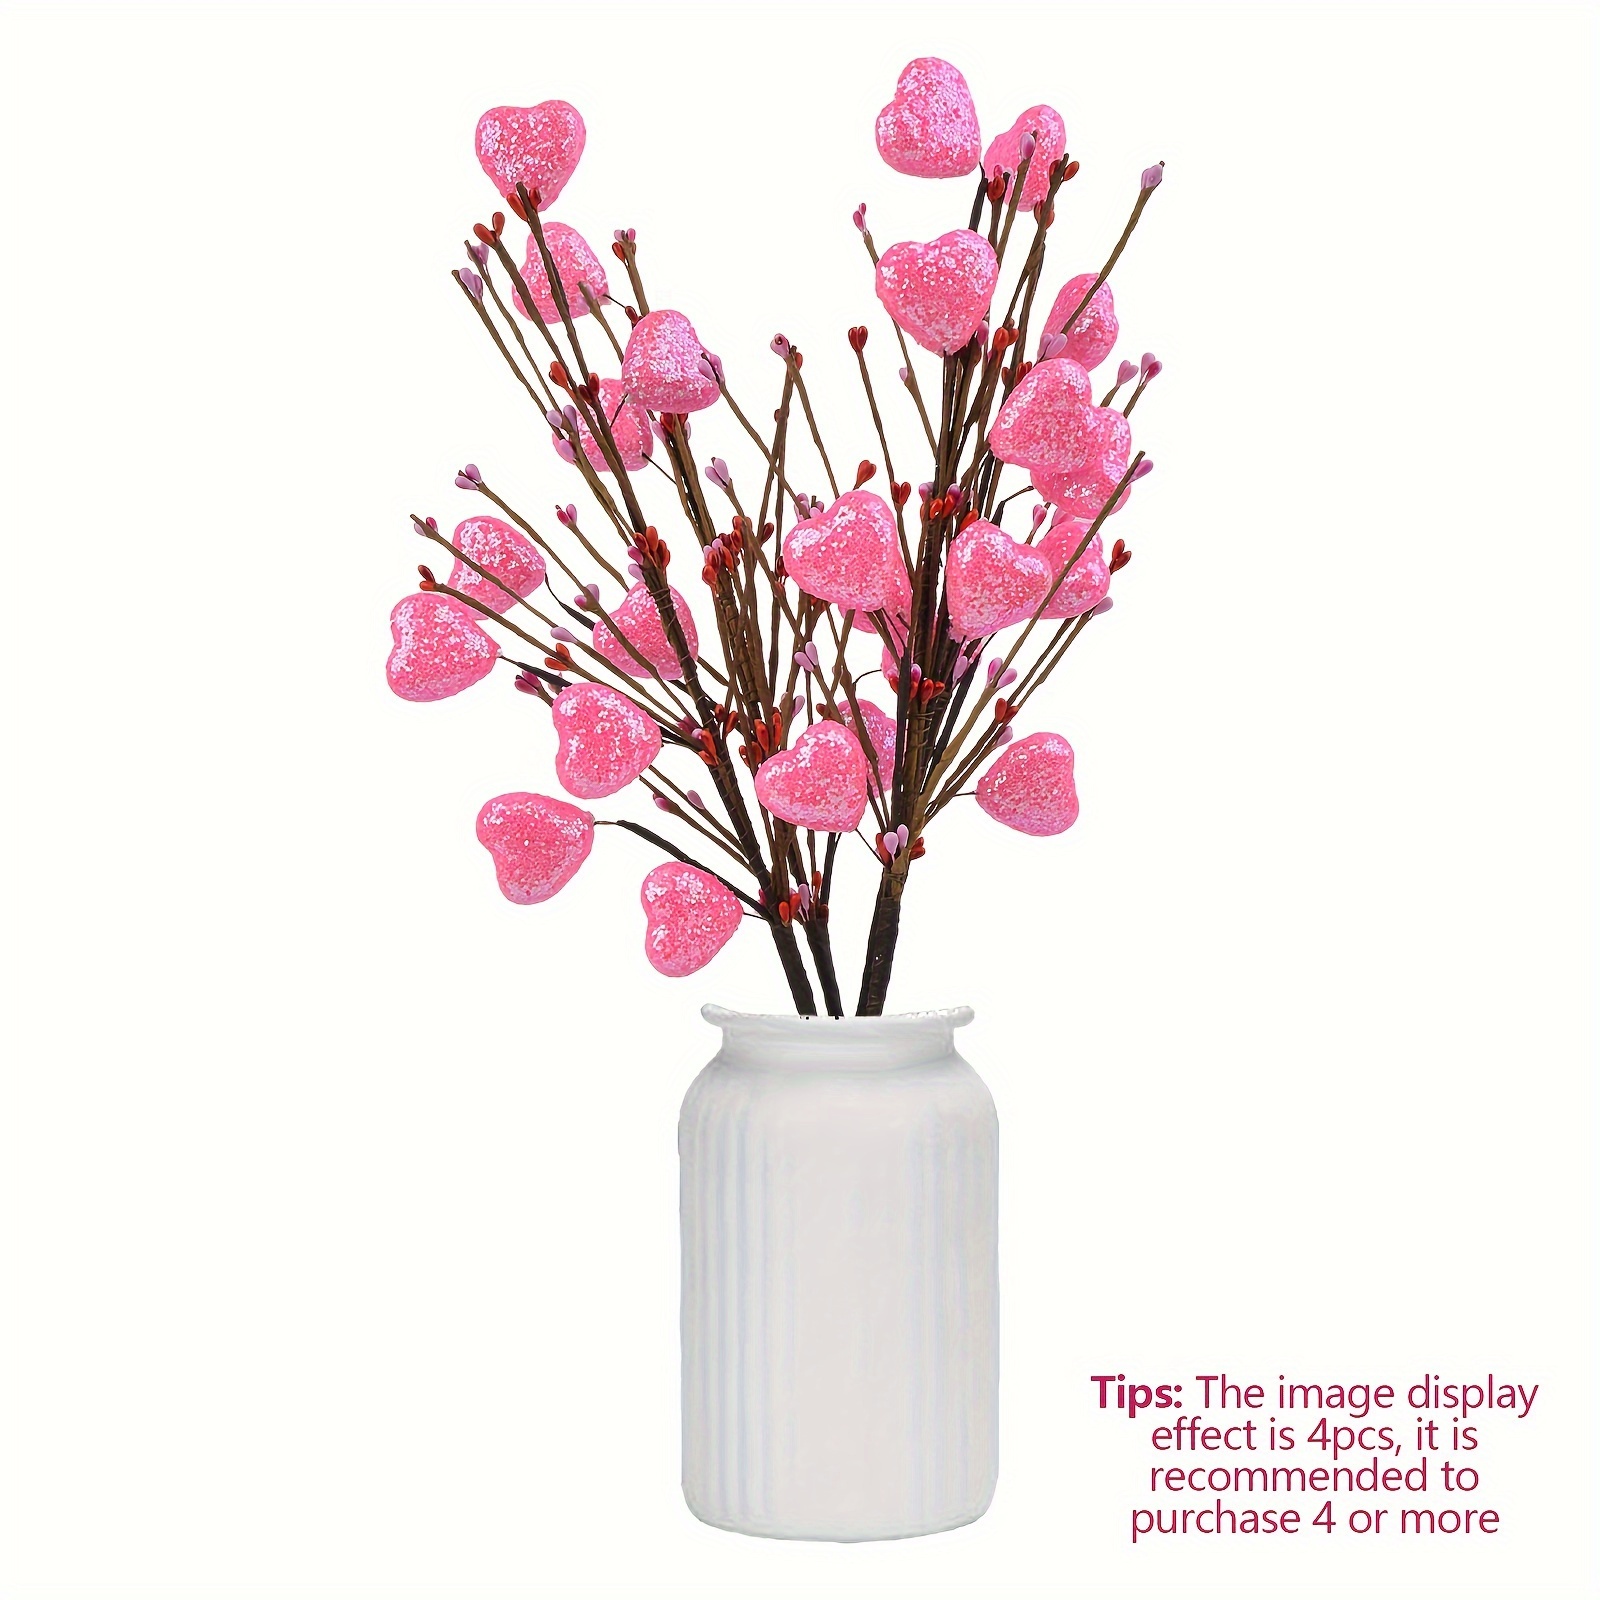 Fourwalls CHERRY ARTIFICIAL RED BERRY STEMS FOR CHRISTMAS